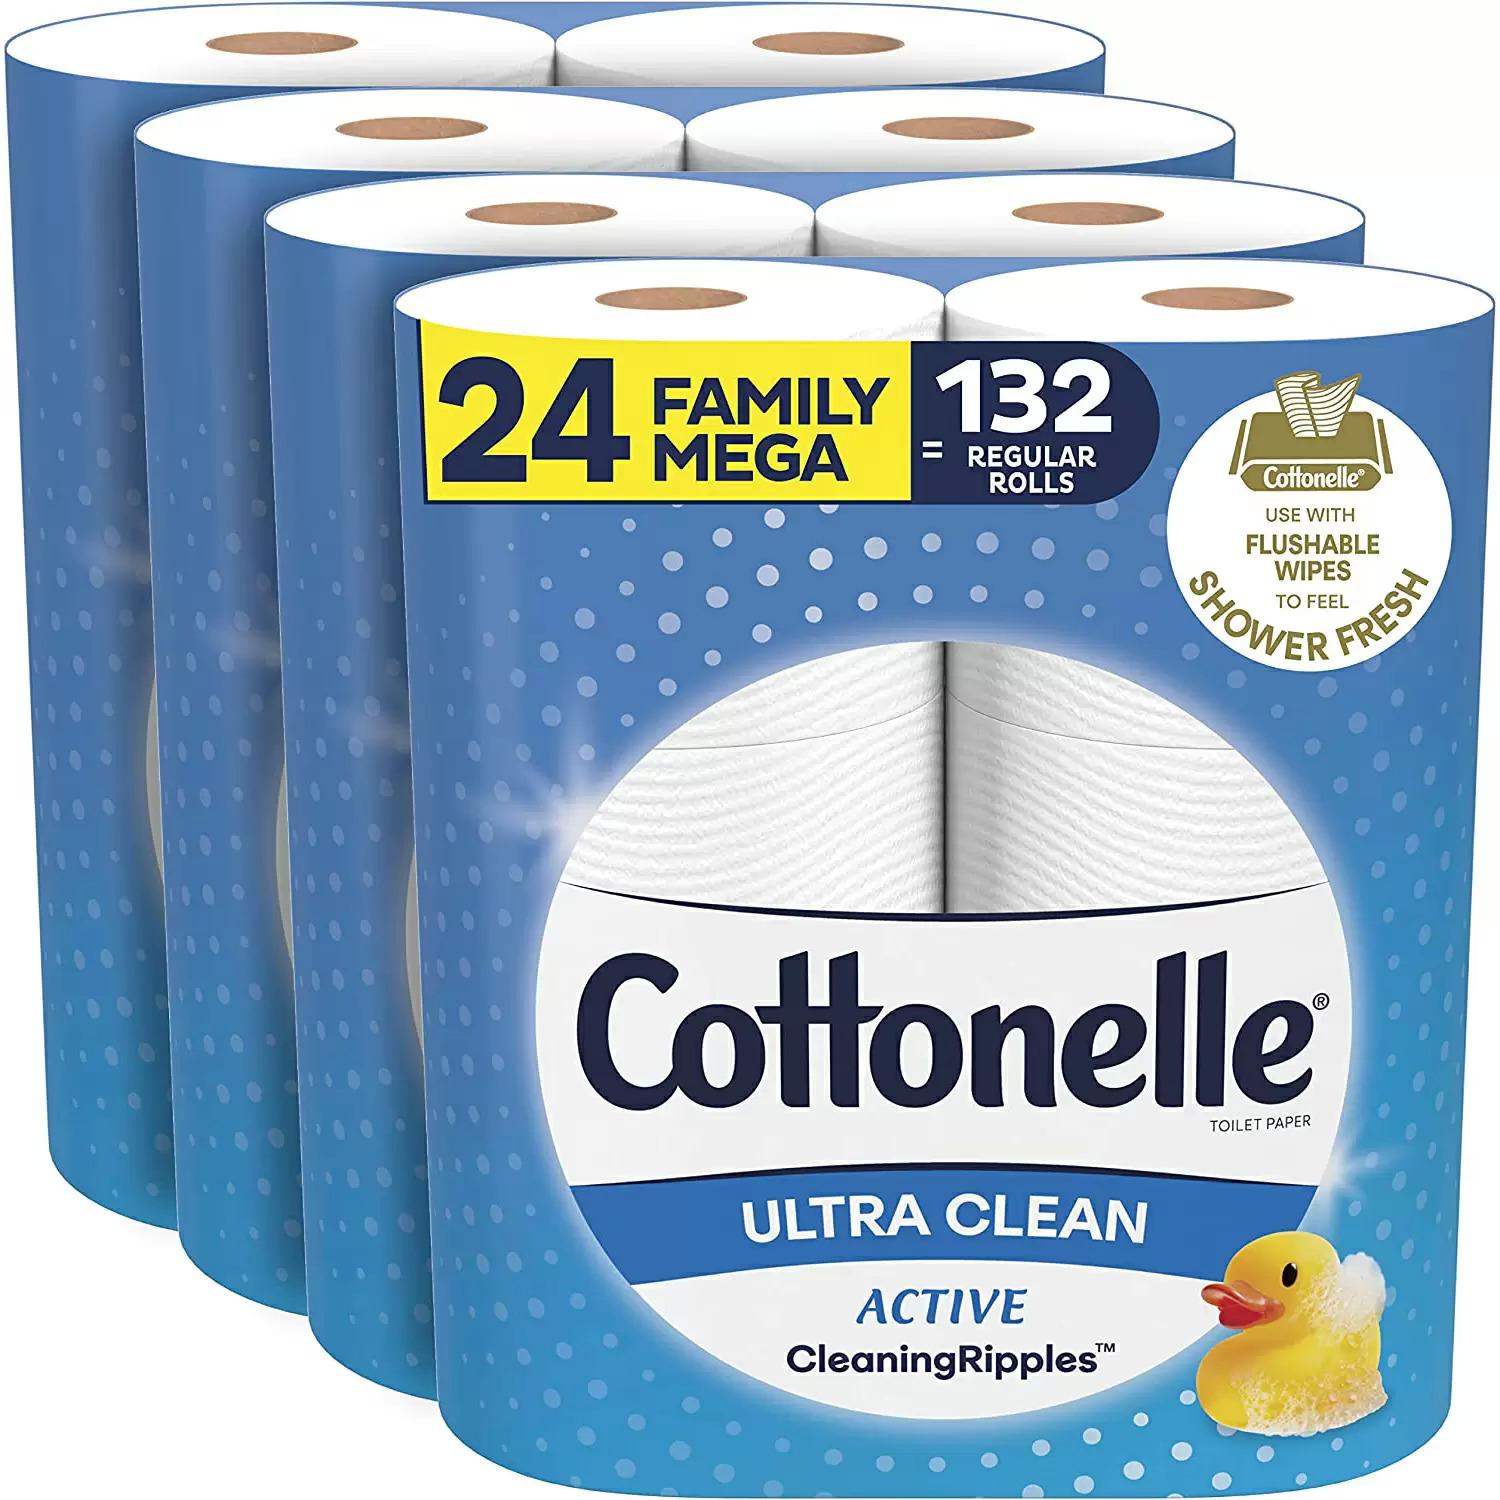 Cottonelle Ultra Clean Family Mega Roll Toilet Paper for $20.69 Shipped